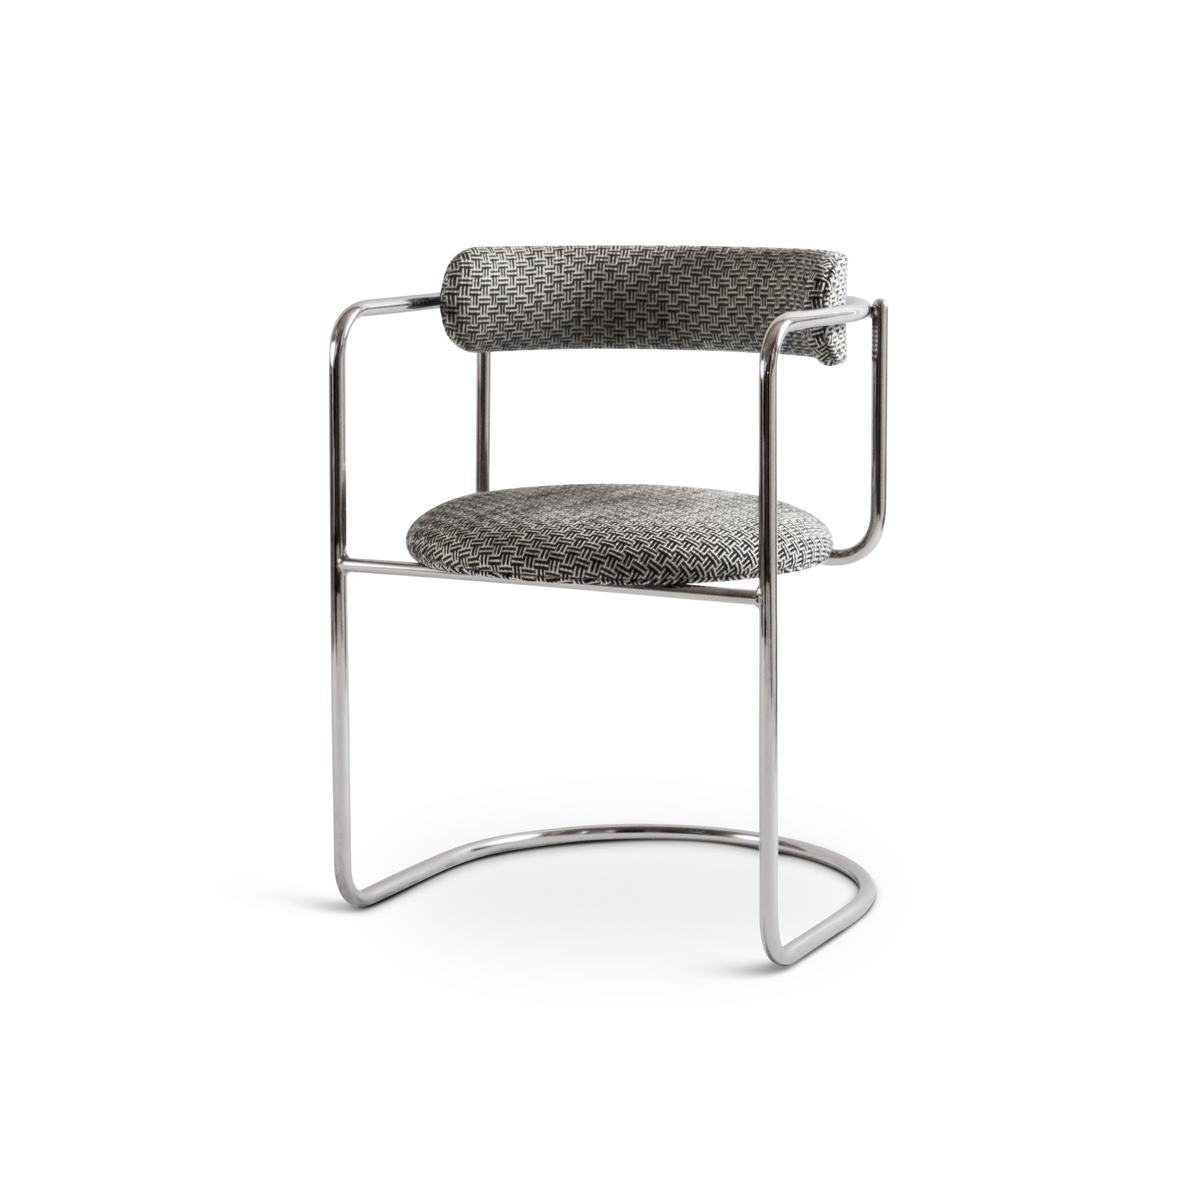 Contemporary Chair 'FF 4-Legs', Vidar Fabric, Black 1880 and White 1880 For Sale 5